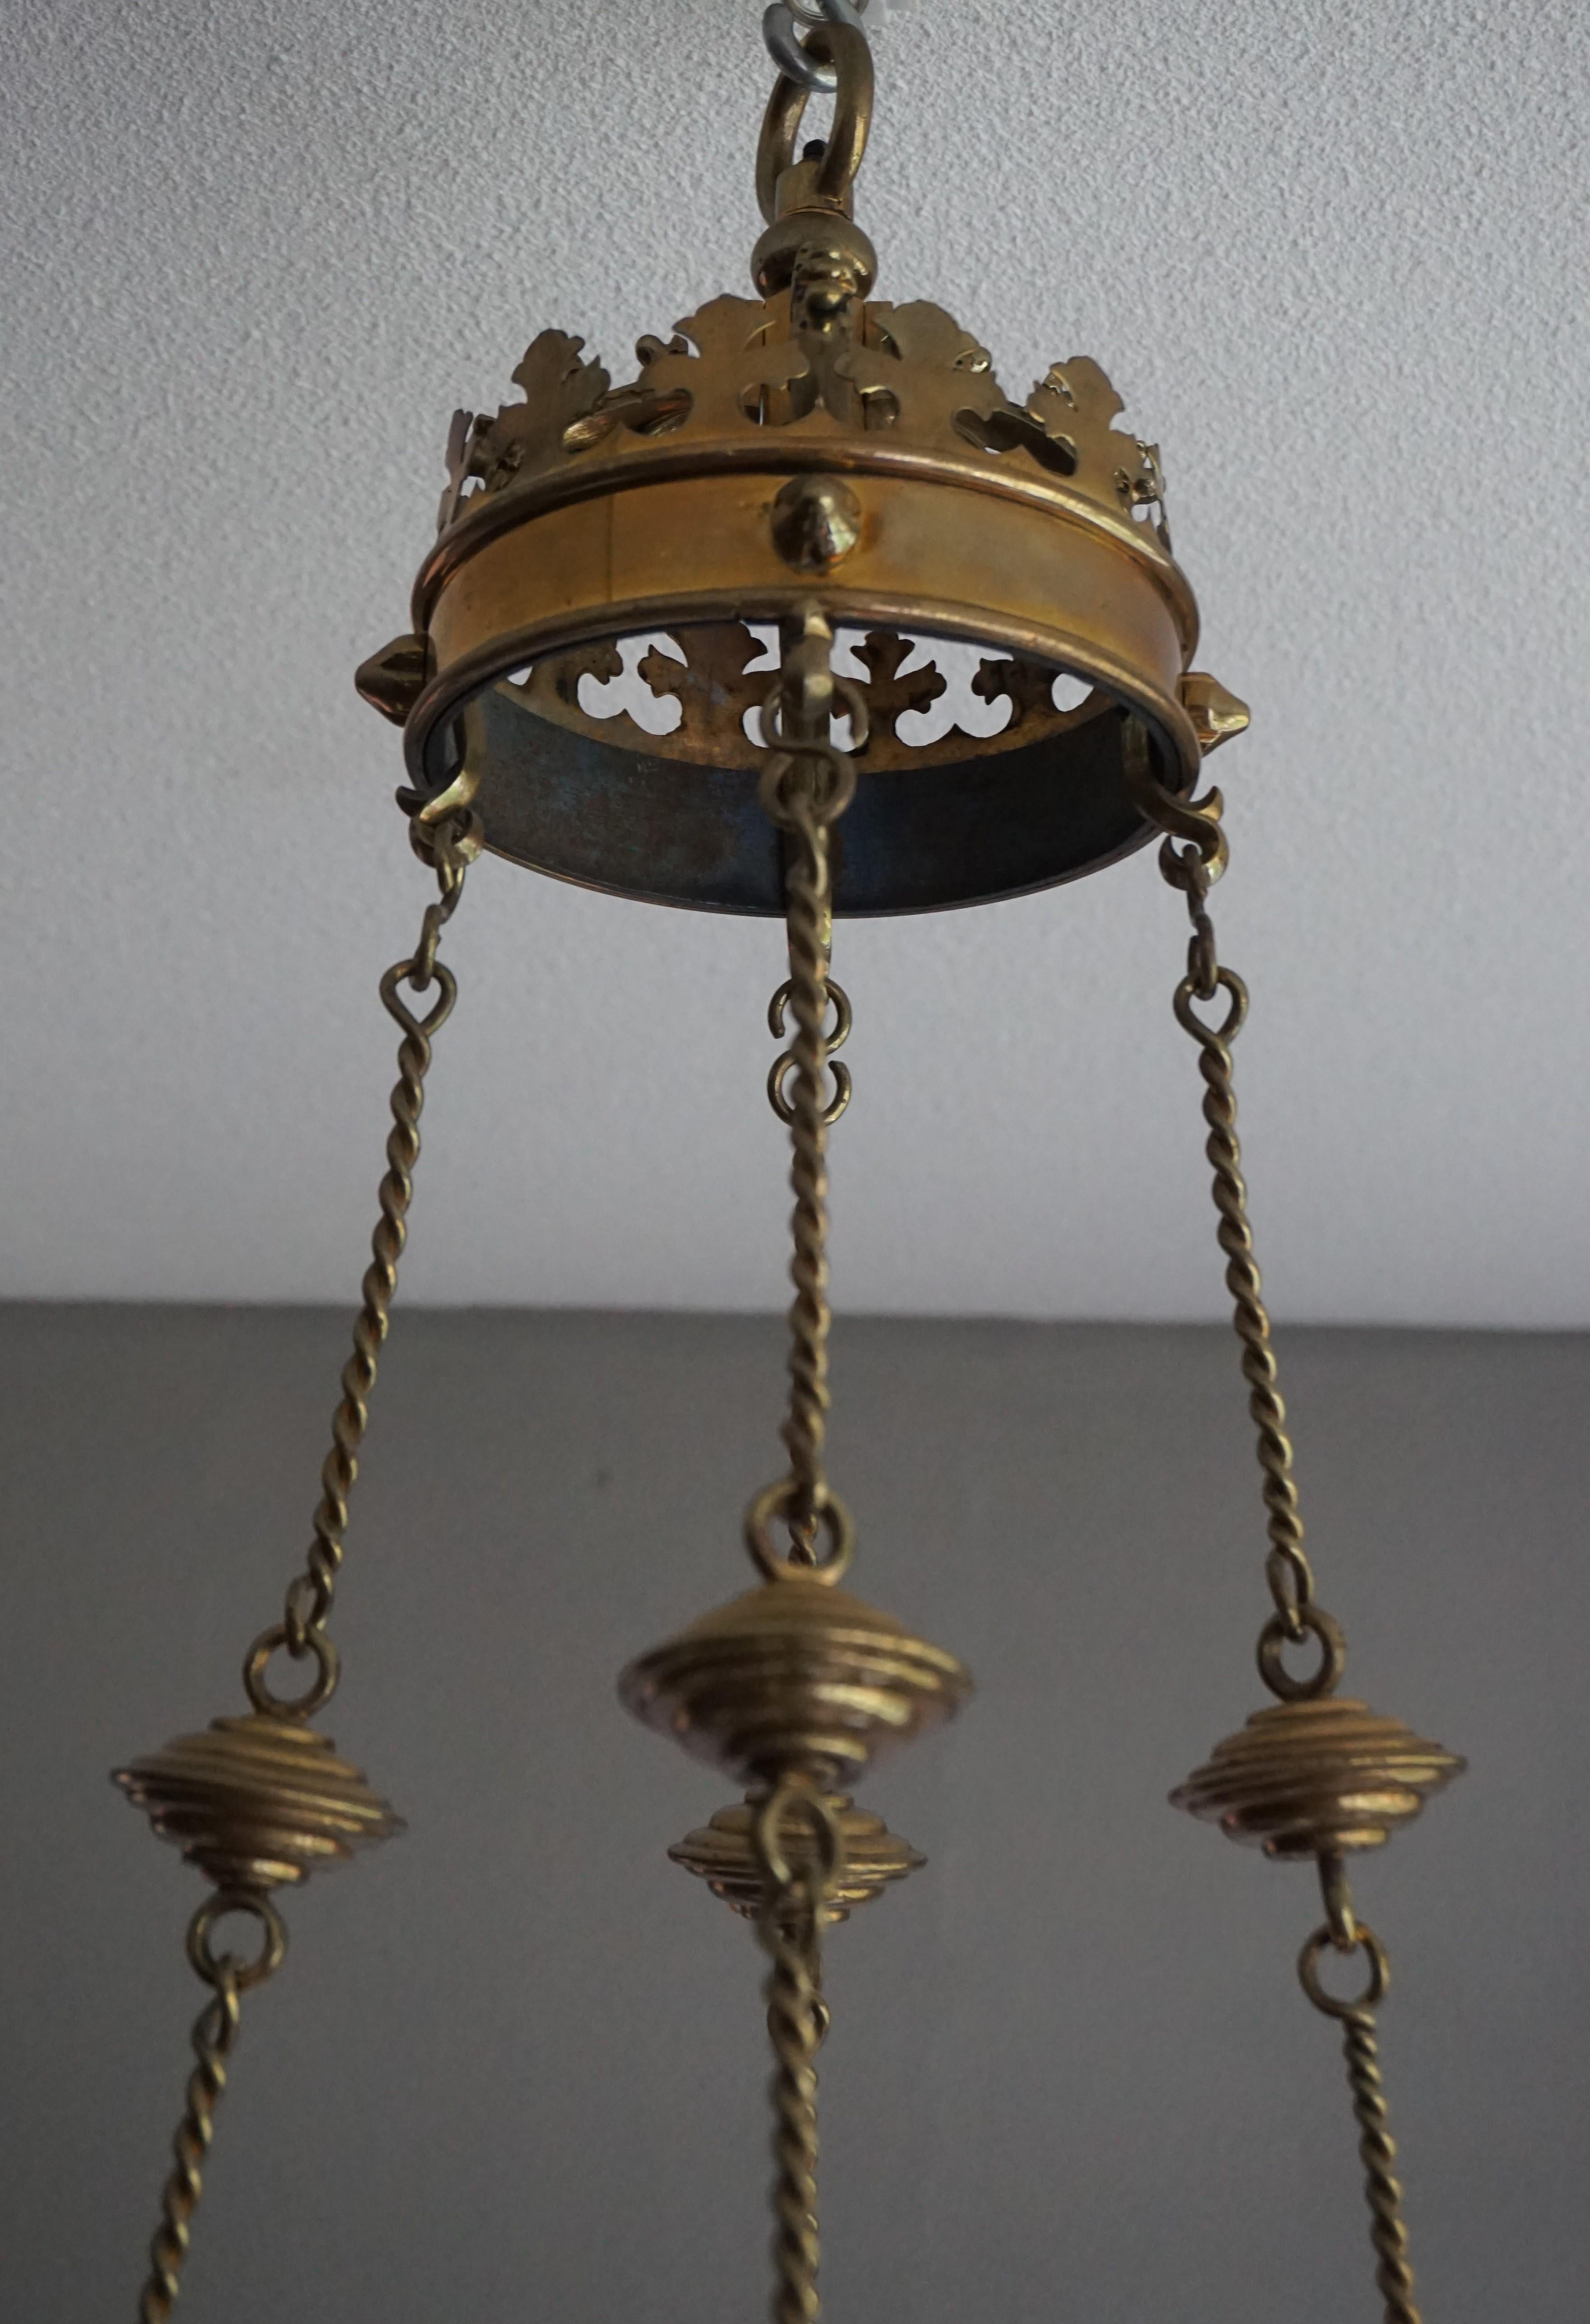 Hand-Crafted Rare and Striking Bronze & Brass Gothic Revival Advent Wreath Candle Chandelier